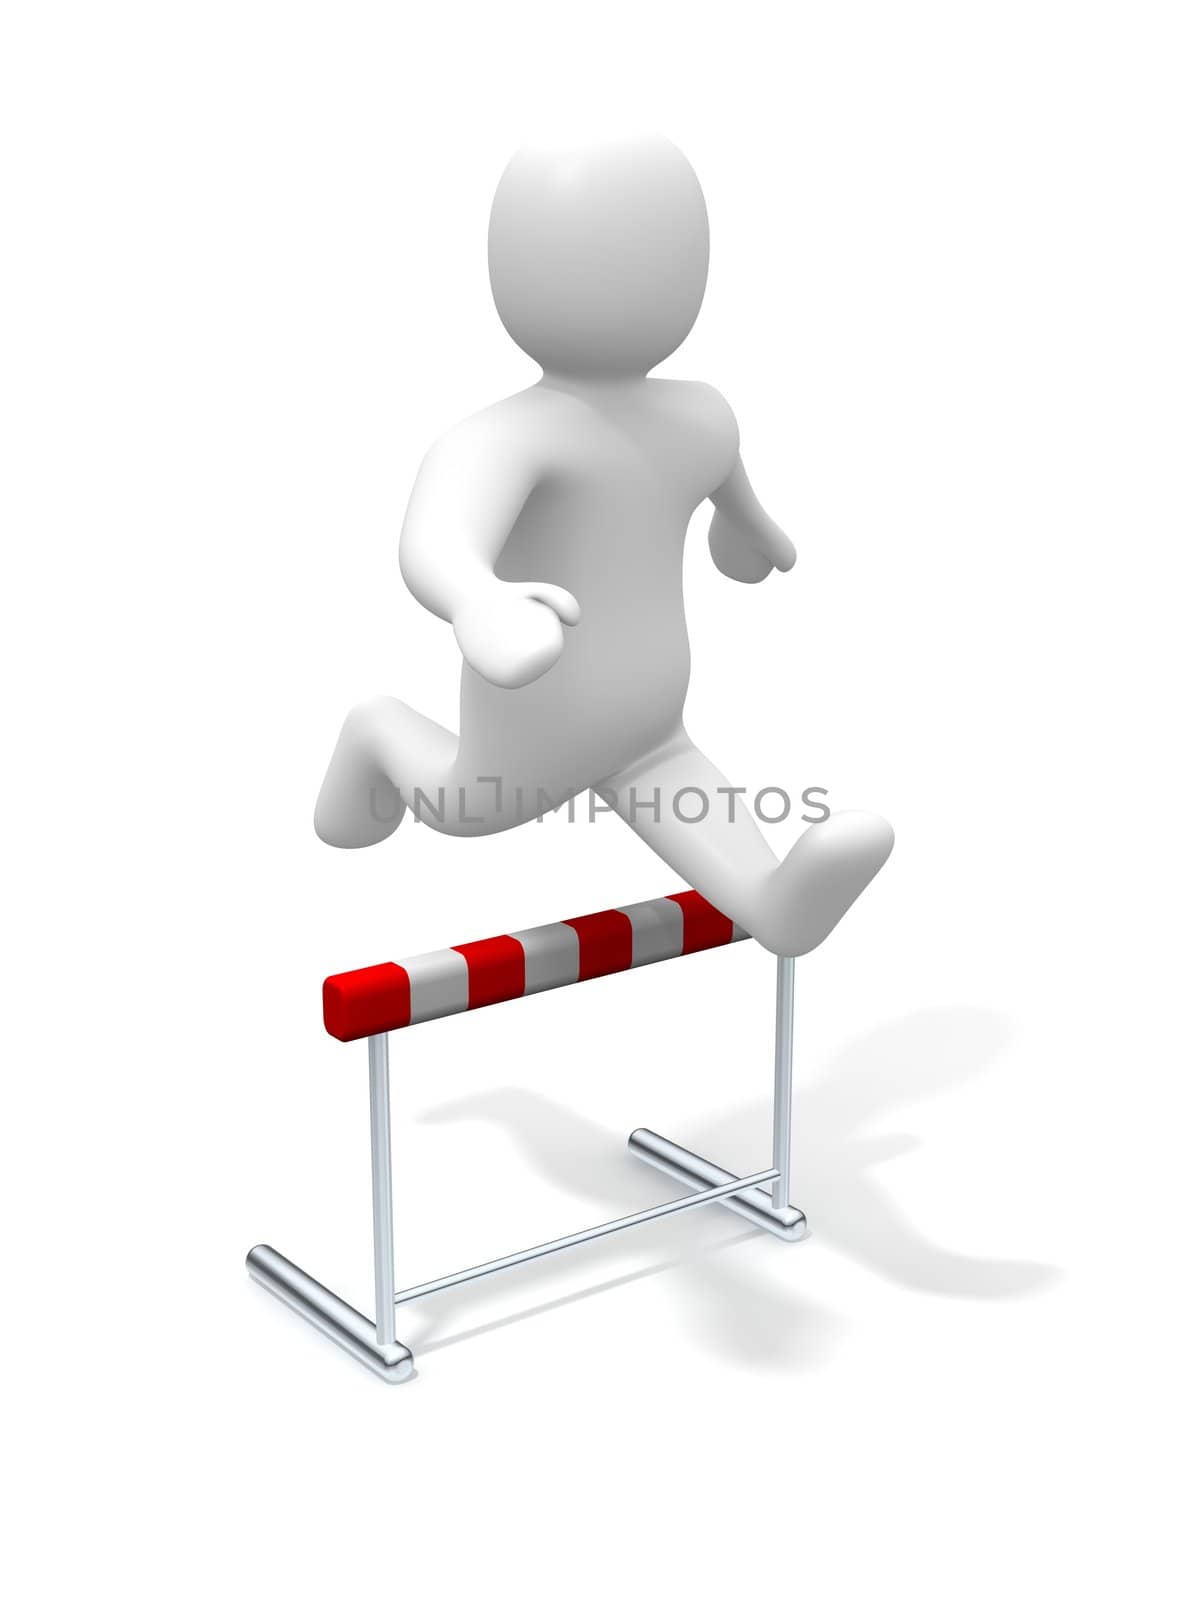 Man jumping over the hurdle. 3d rendered illustration.